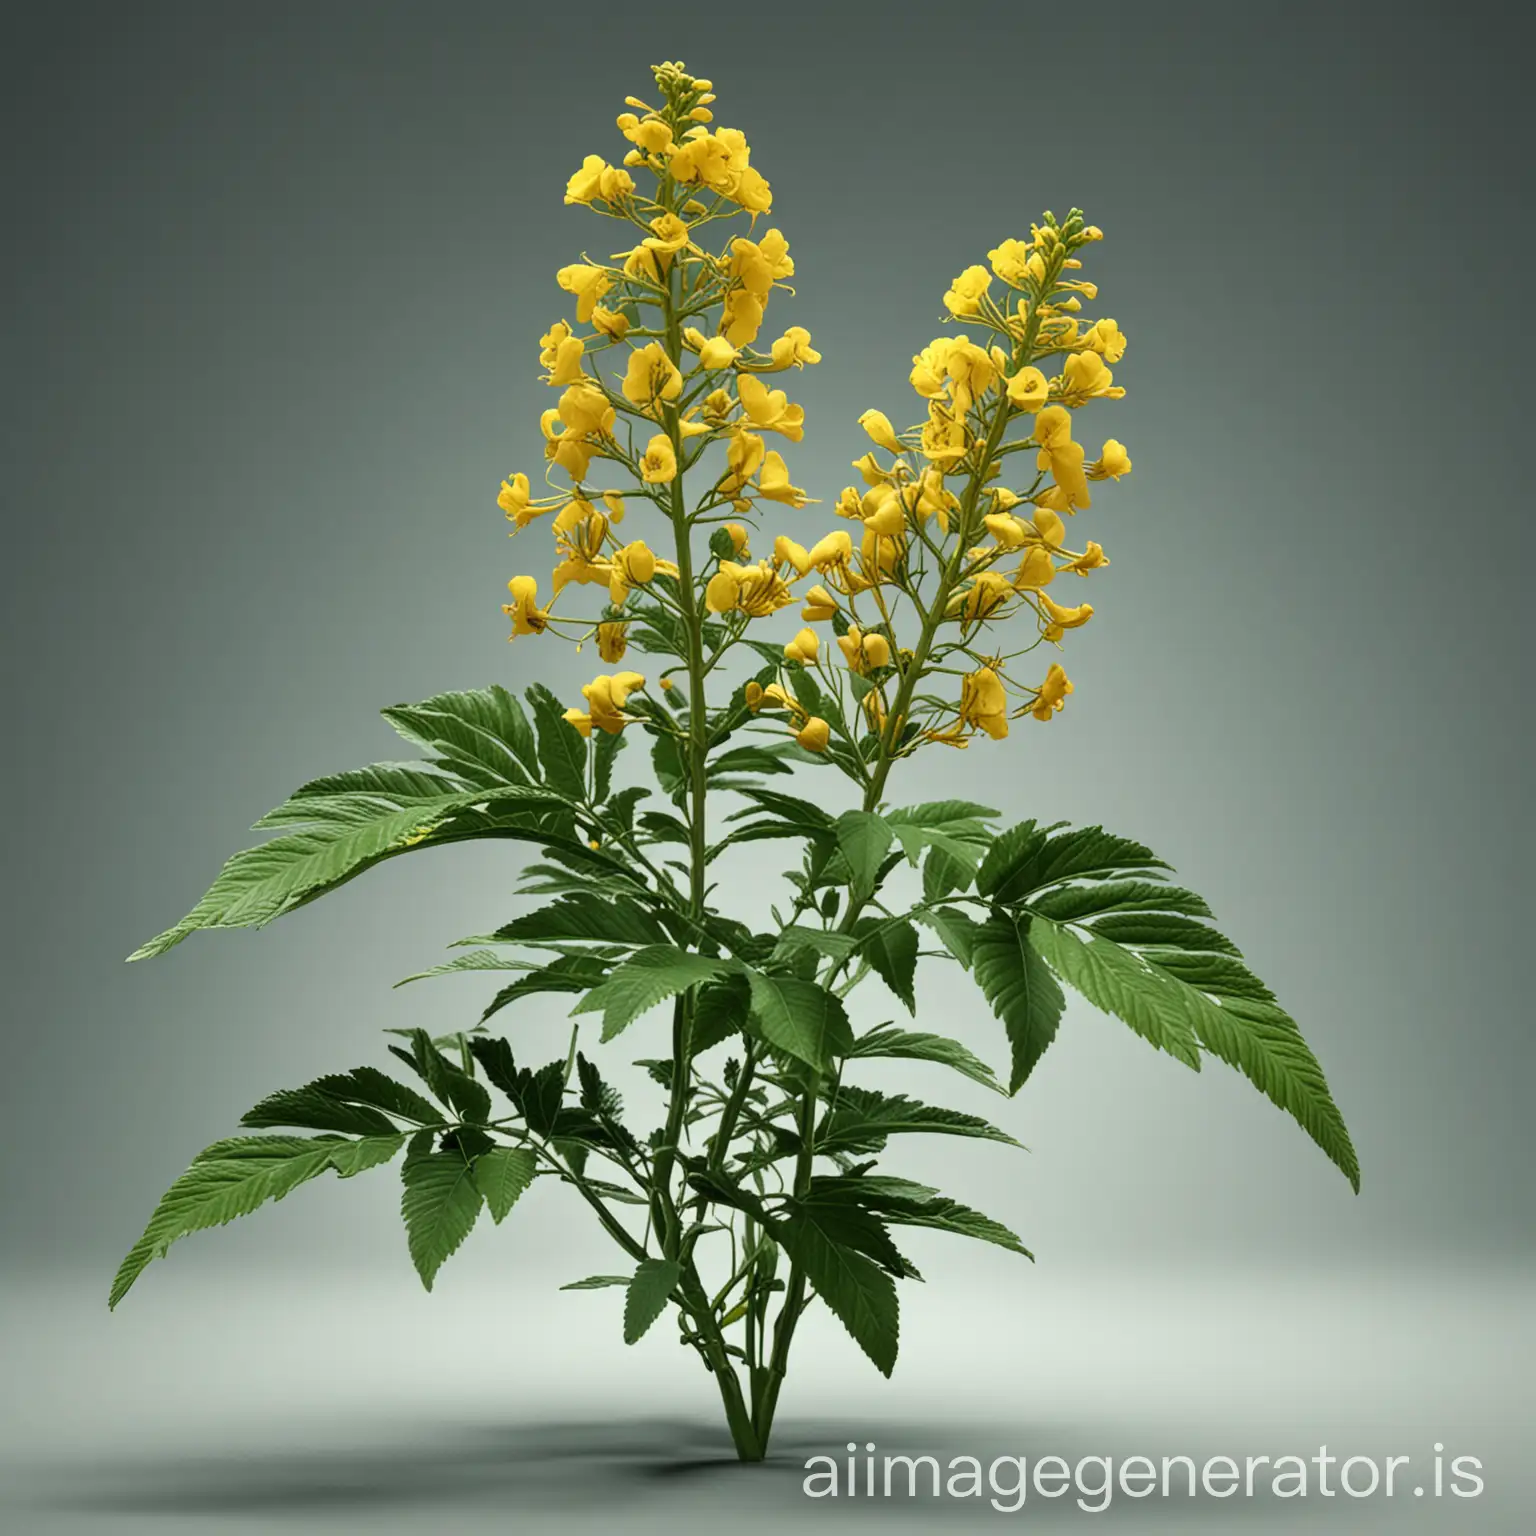 Creating a super high-resolution 3D image of a Senna plant can illustrate its role in stimulating the digestive system, leaving you feeling lighter and more energized. The design should be extreme, dynamic, attention-grabbing, and exotic.